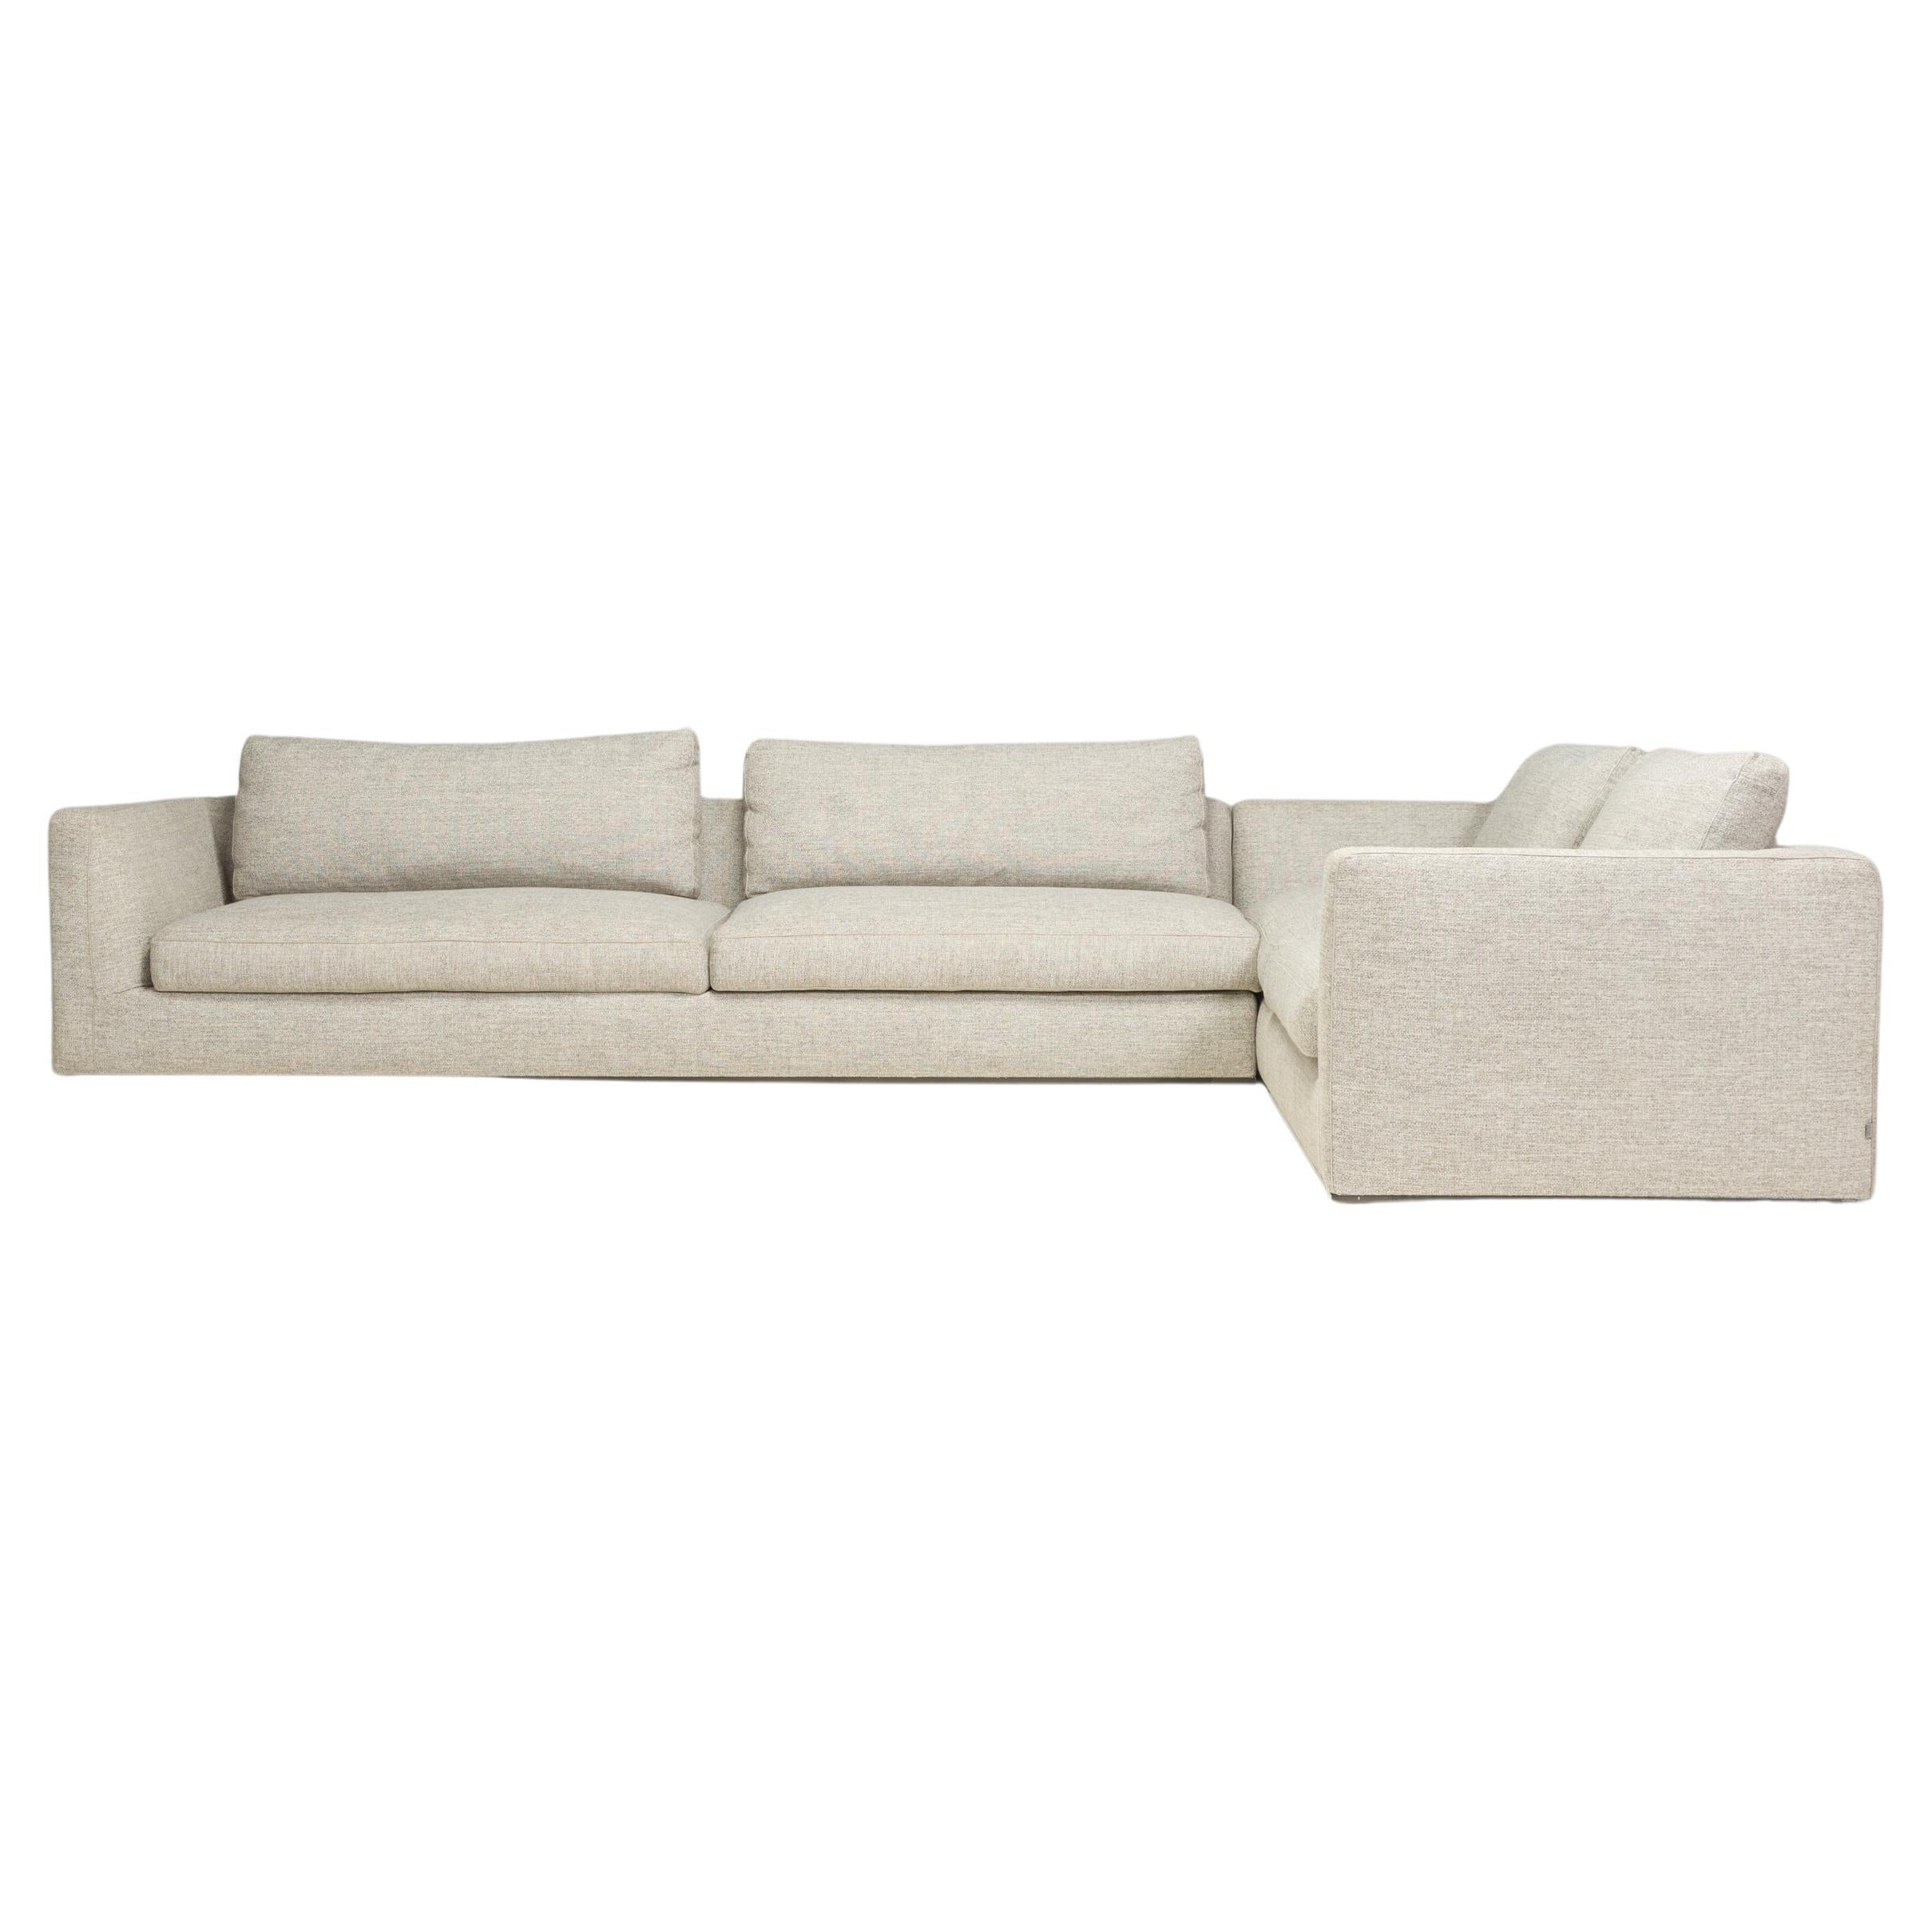 Used Sectional Sofas - 874 For Sale on 1stDibs | used sectional couches for  sale, used sectional for sale, sectional couch used